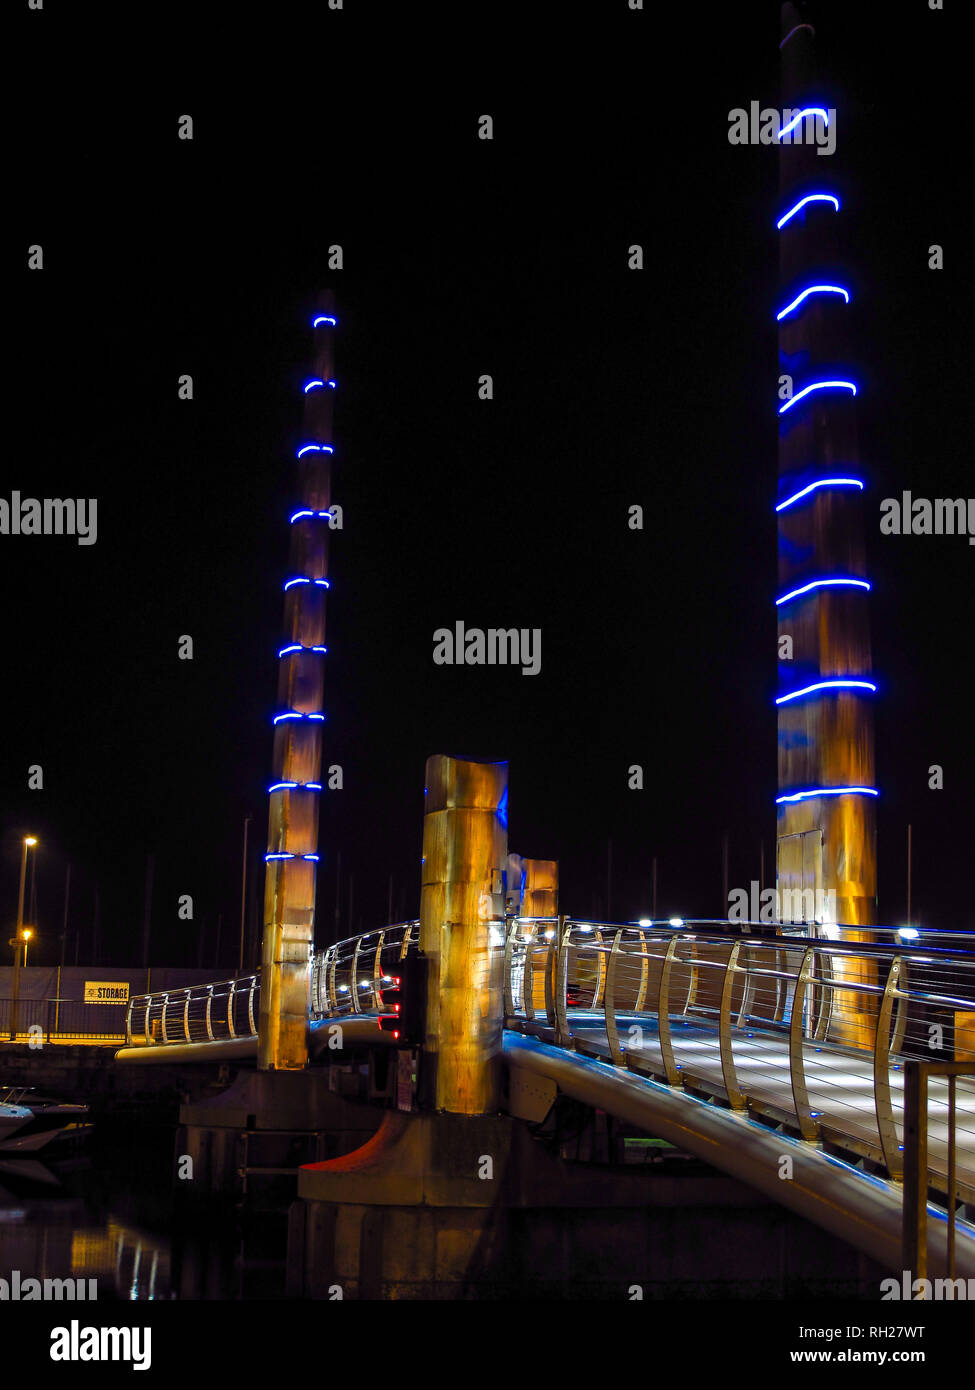 Torquay Marina Harbour Bridge, with blue and golden lights. Bridge rises to allow vessels in the marina. Stock Photo